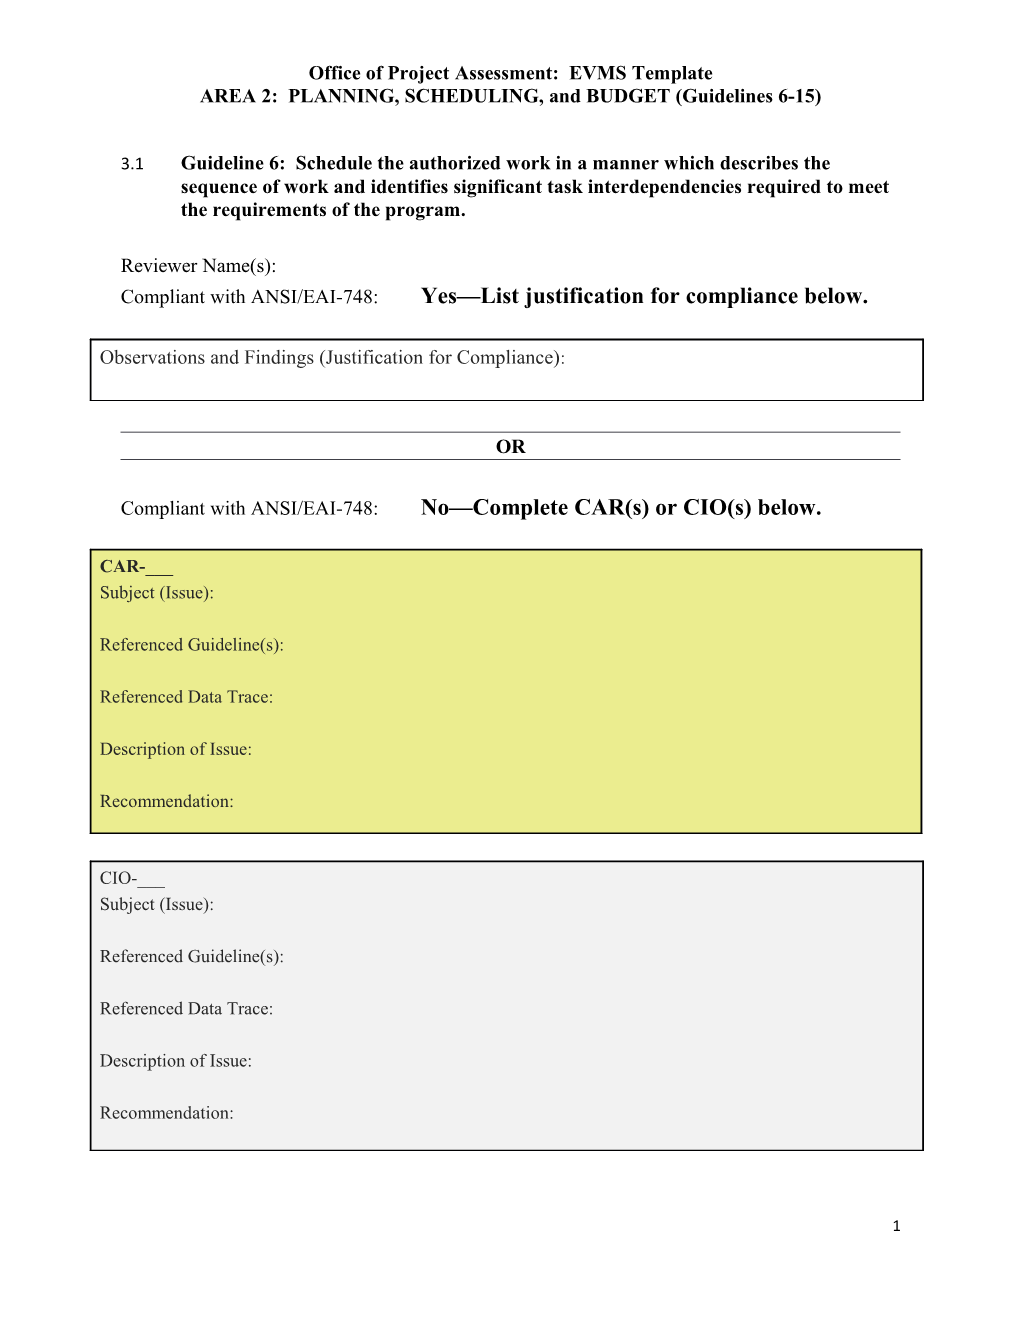 Office of Project Assessment: EVMS Template